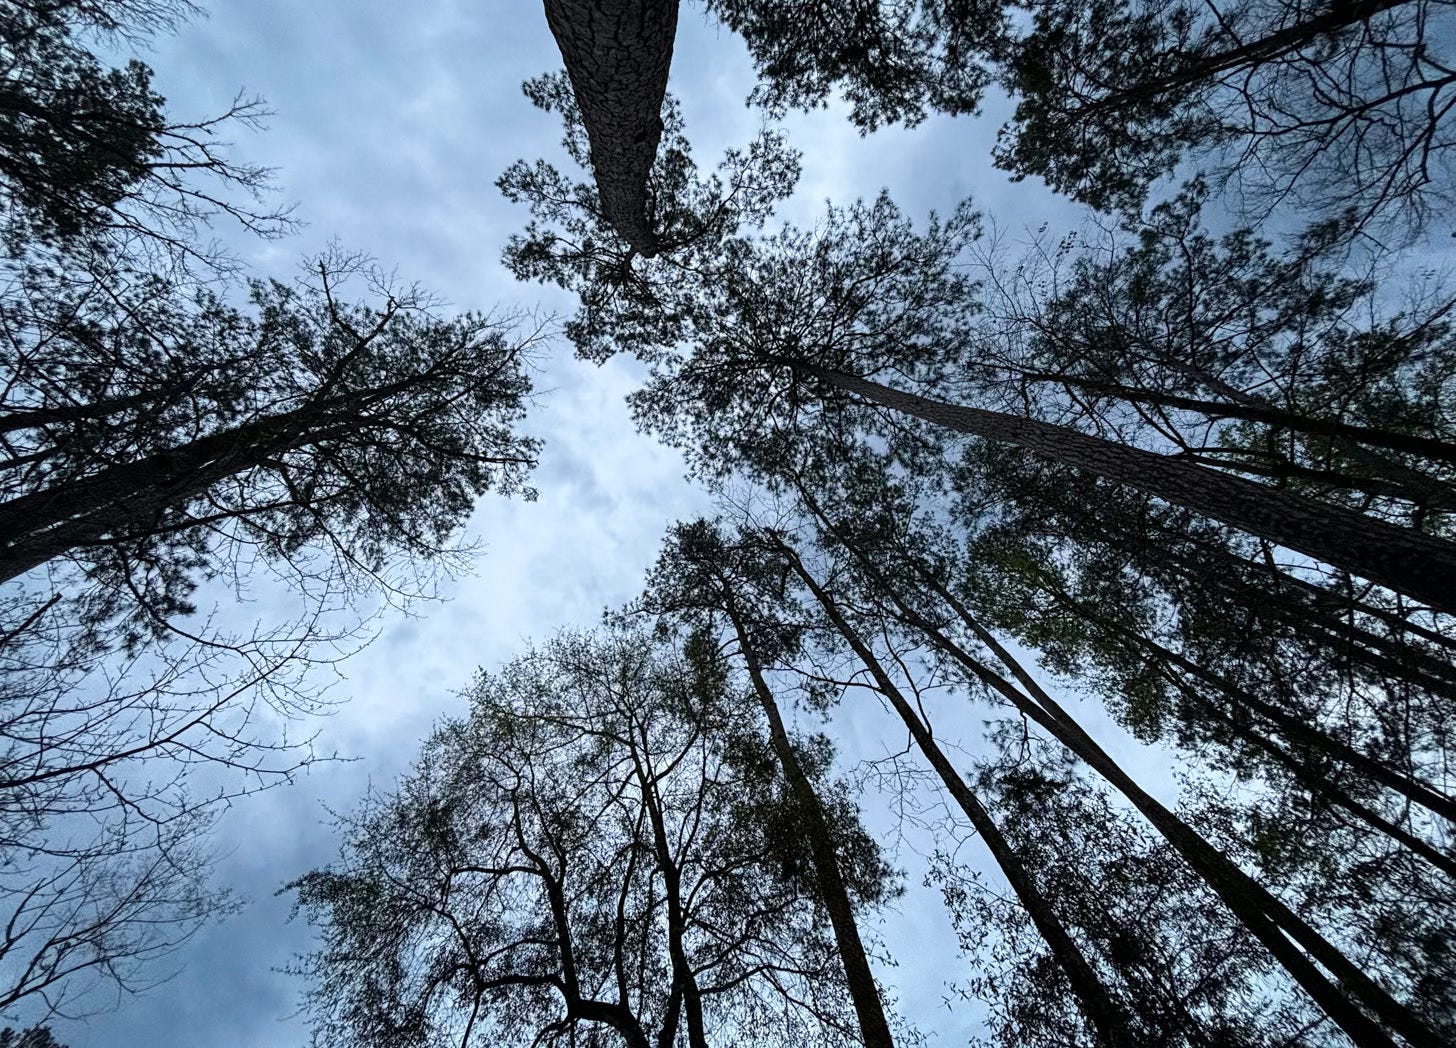 view of towering pine trees from below against a sky at dusk